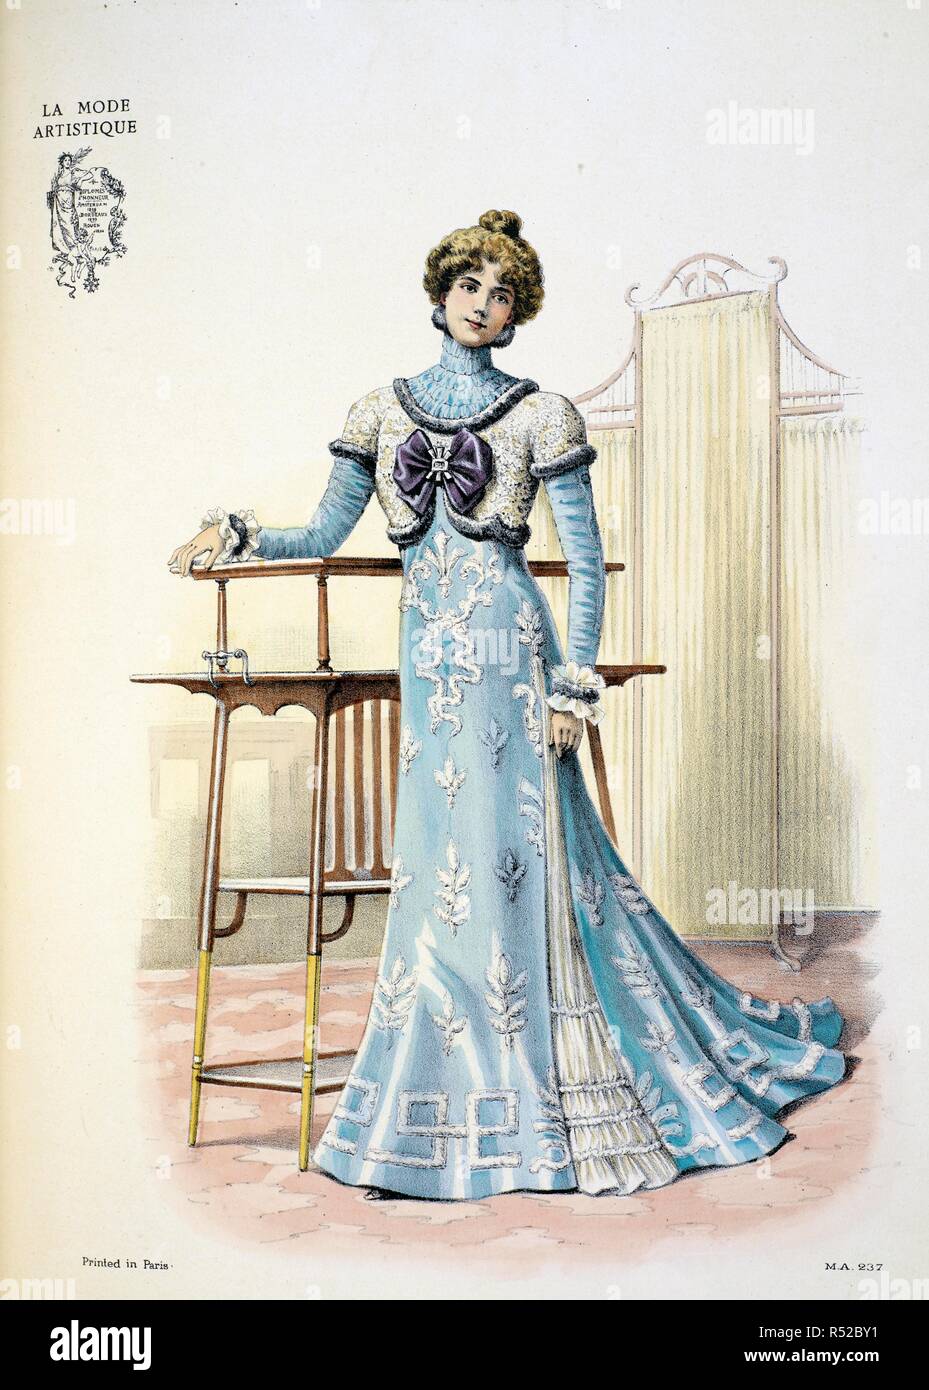 Design by Paquin. A tea-gown. Soft satin in turquoise blue is the material, embroidered with incrustations of mousseline bouillonneÃ© edged with white chenille in an Empire style. ... The gown is cut up on the left side to show a petticoat of gauged mousseline de soie, which soft material has also been used for the guimpe and sleeves. The bolero is made of guipure, in the Empre fashion, and is decorated with a large bow of bright parma-coolured velvet clasped by a buckle Ã  l'Empire. The cuffs have a band of fur and double frill of mousseline. The Powder Puff [An English edition of 'La Mode ar Stock Photo